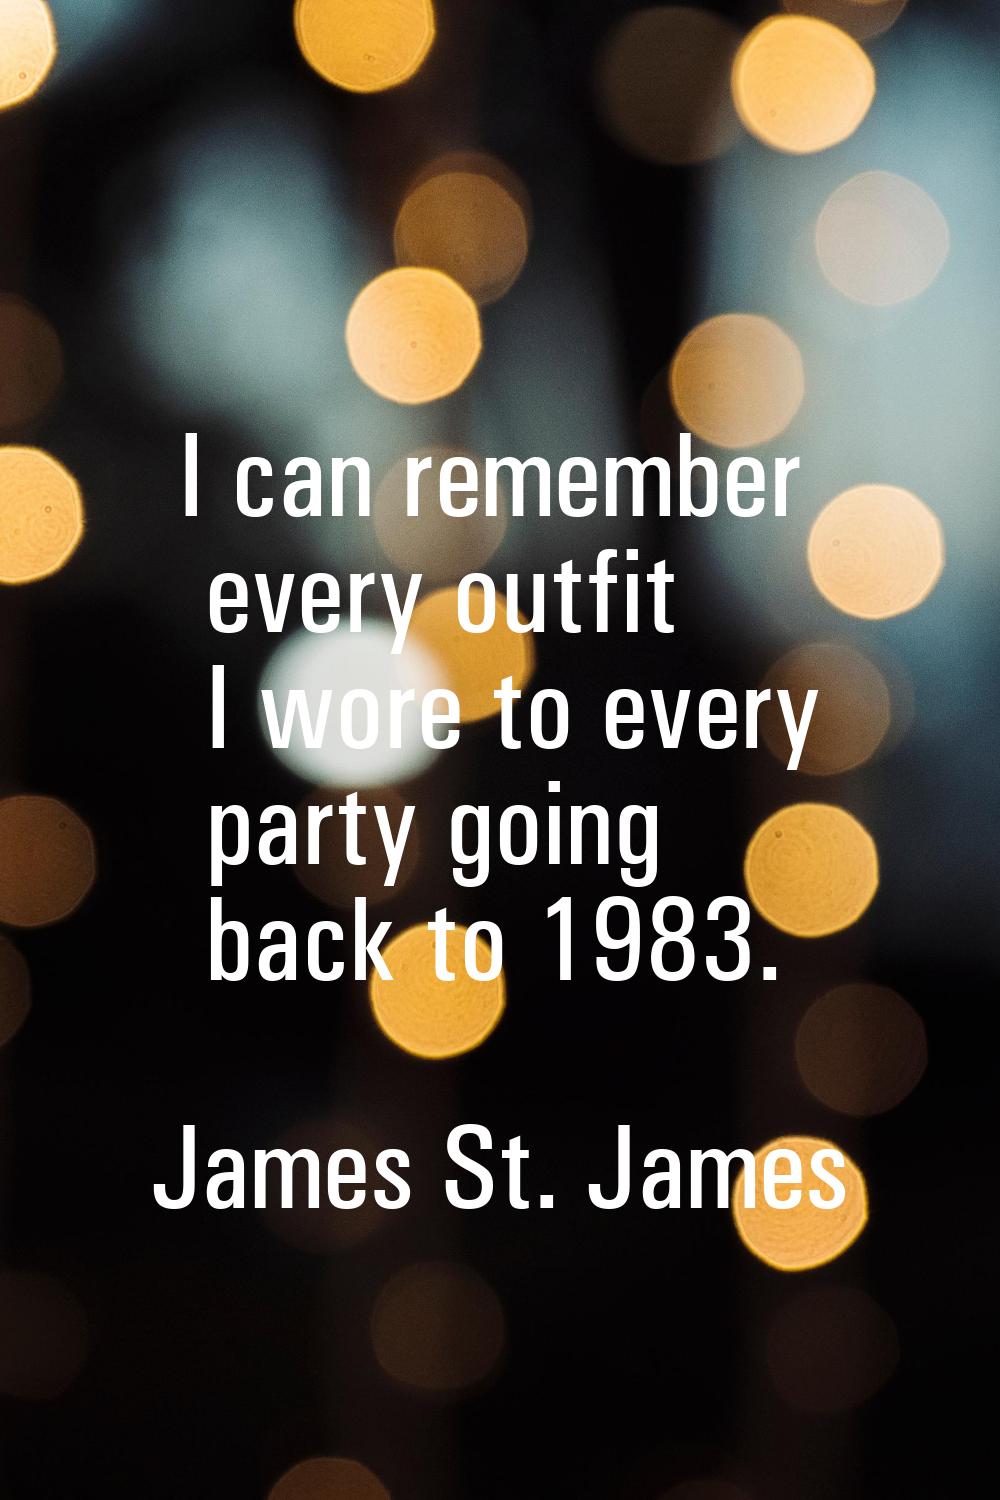 I can remember every outfit I wore to every party going back to 1983.